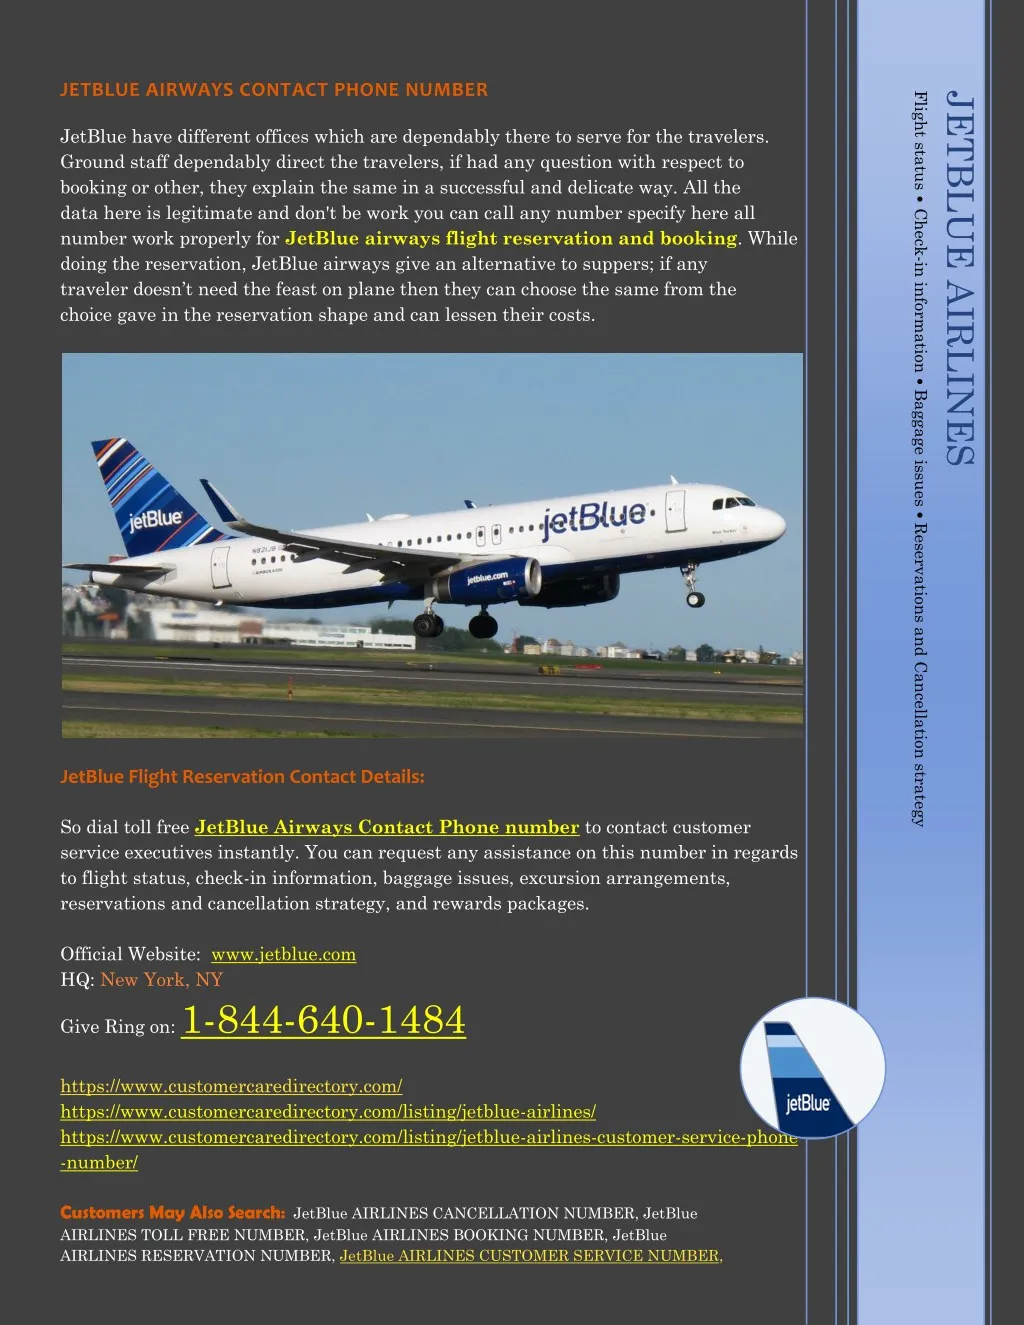 PPT - JETBLUE AIRLINES CONTACT PHONE NUMBER PowerPoint Presentation - ID:7674451